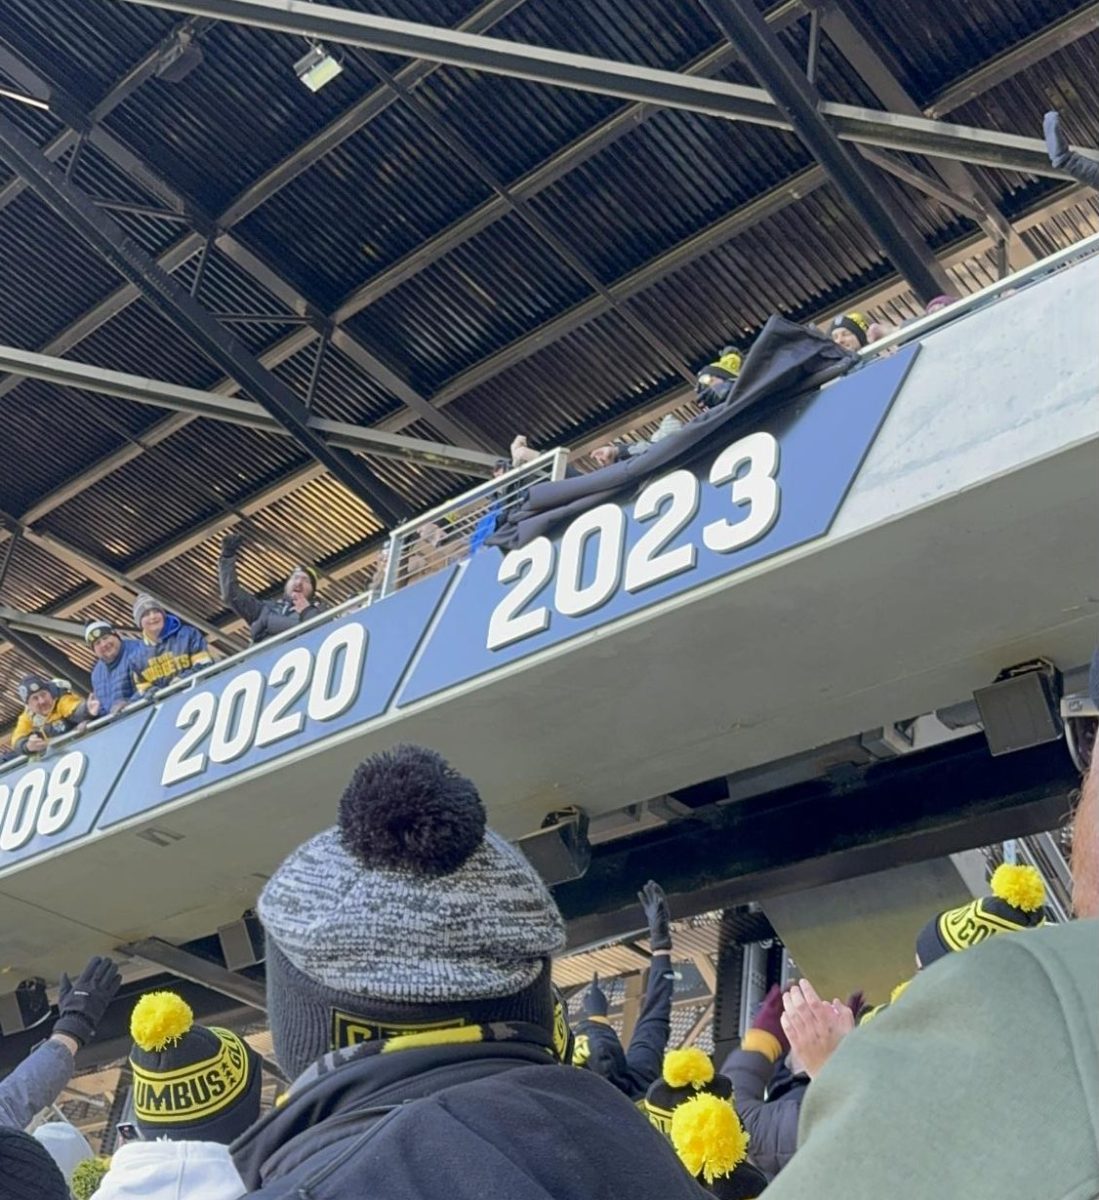 The+Columbus+Crew+2023+MLS+cup+wall+banner+is+revealed+to+fans.+